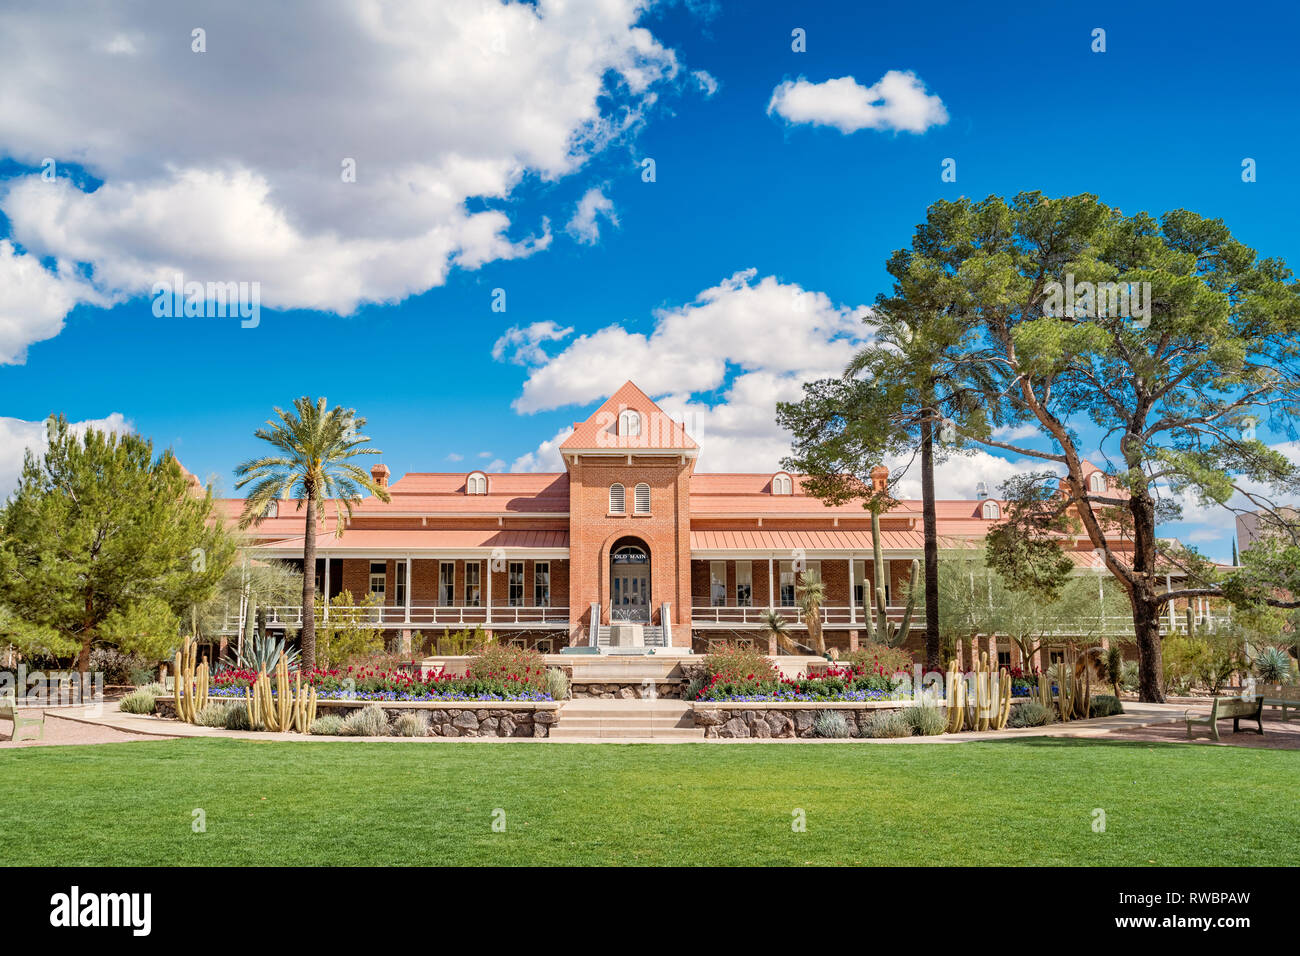 The Old Main building on the campus of the University of Arizona in Tucson, Arizona, USA Stock Photo